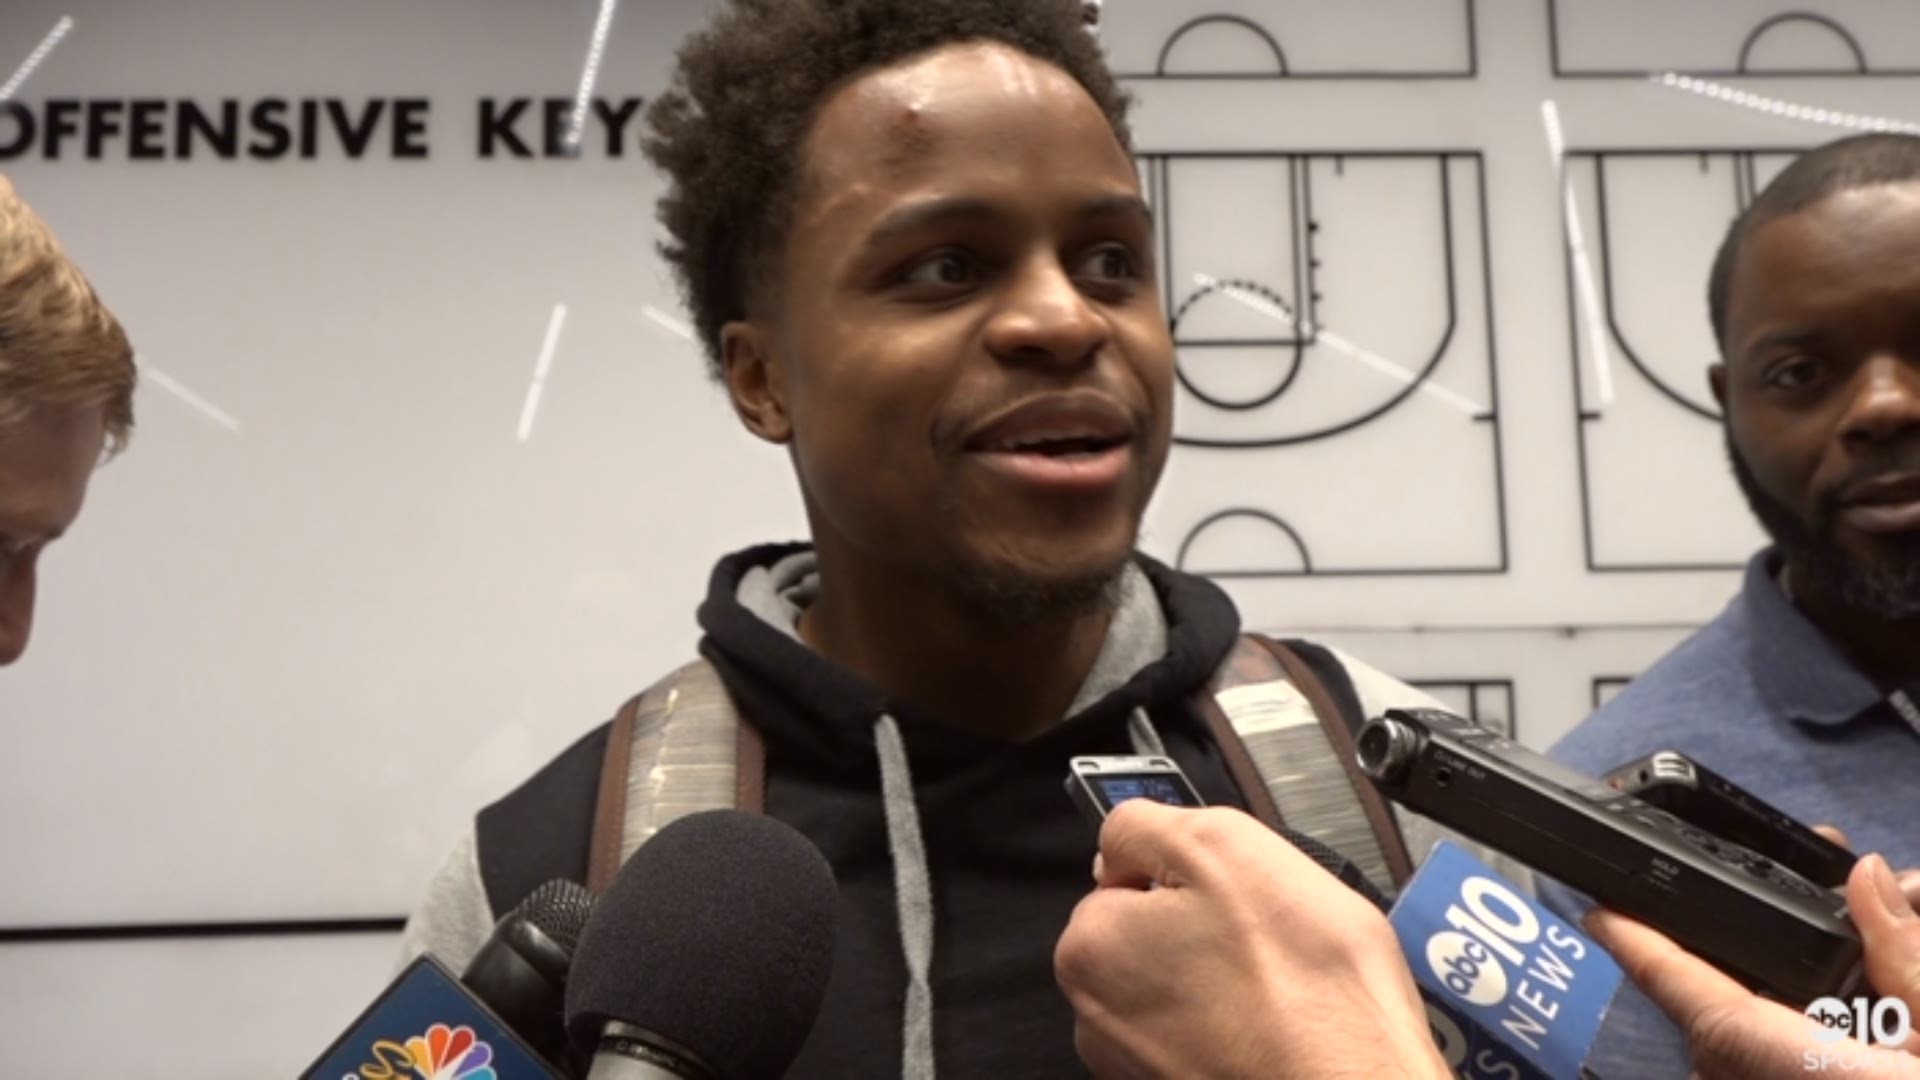 Kings point guard Yogi Ferrell talks about the spark he provided off the bench in Wednesday's 121-130 victory over the Minnesota Timberwolves in Sacramento.